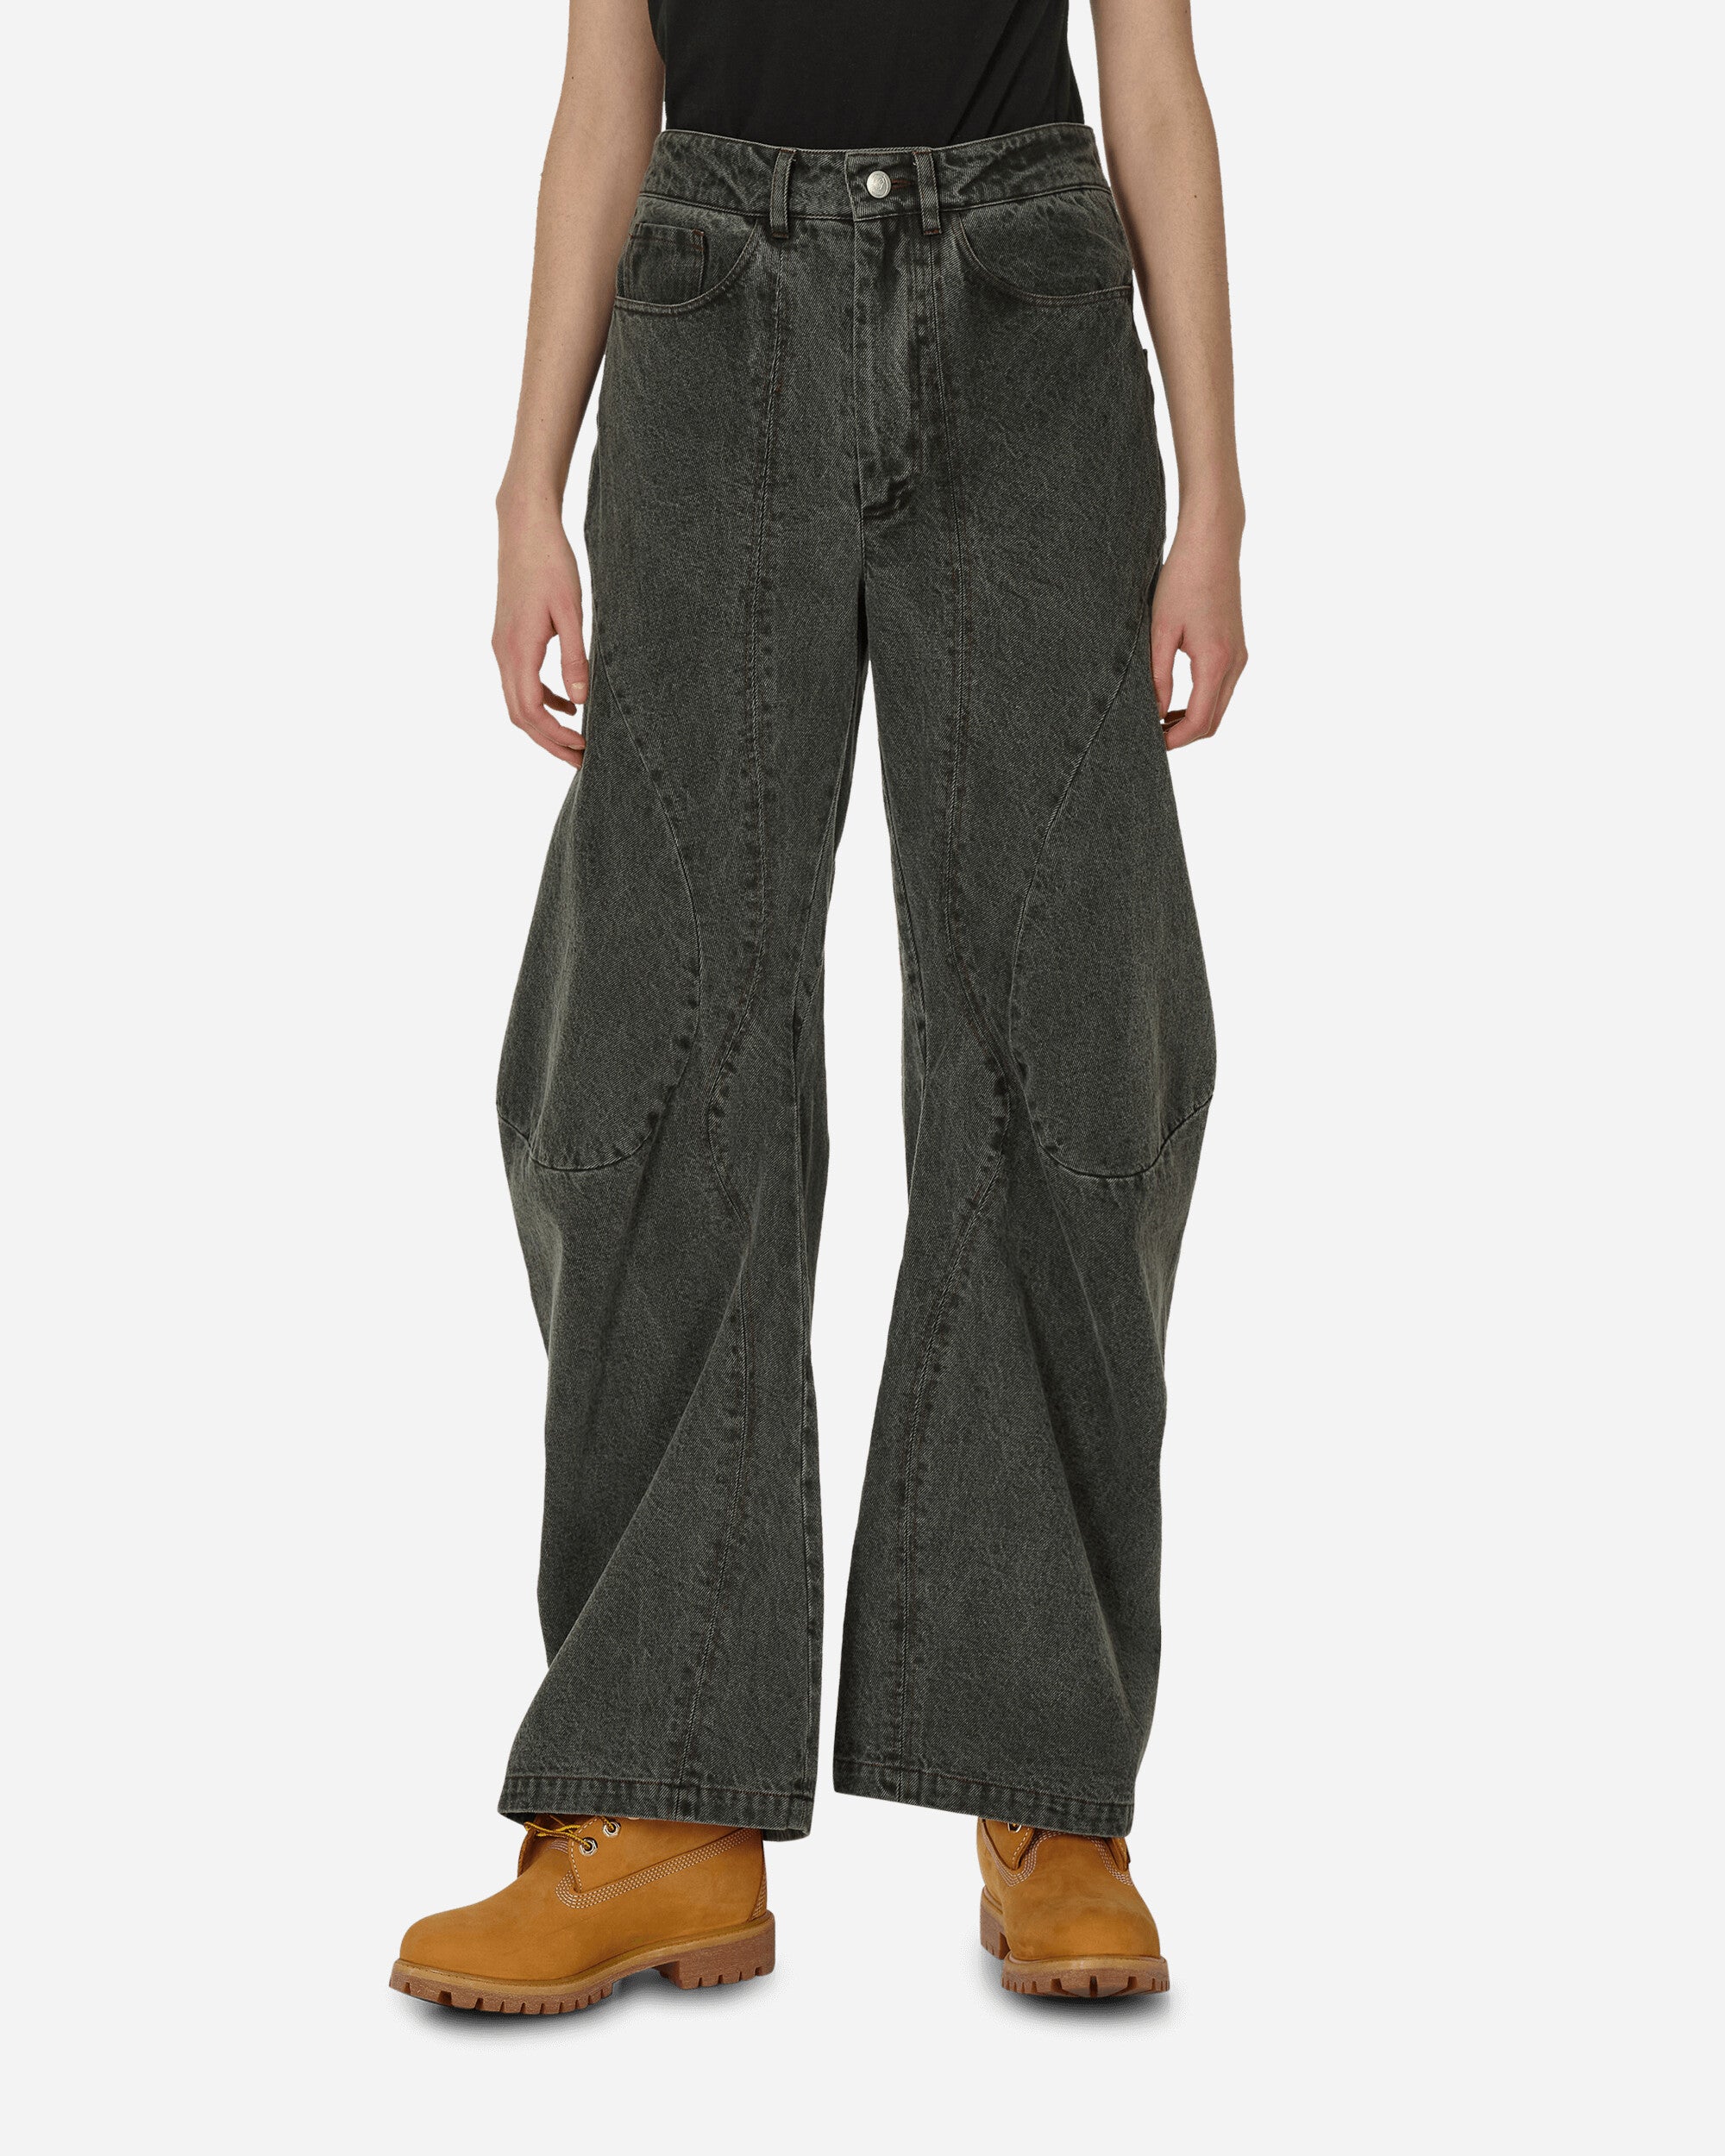 David Engineered Flare Jeans Charcoal